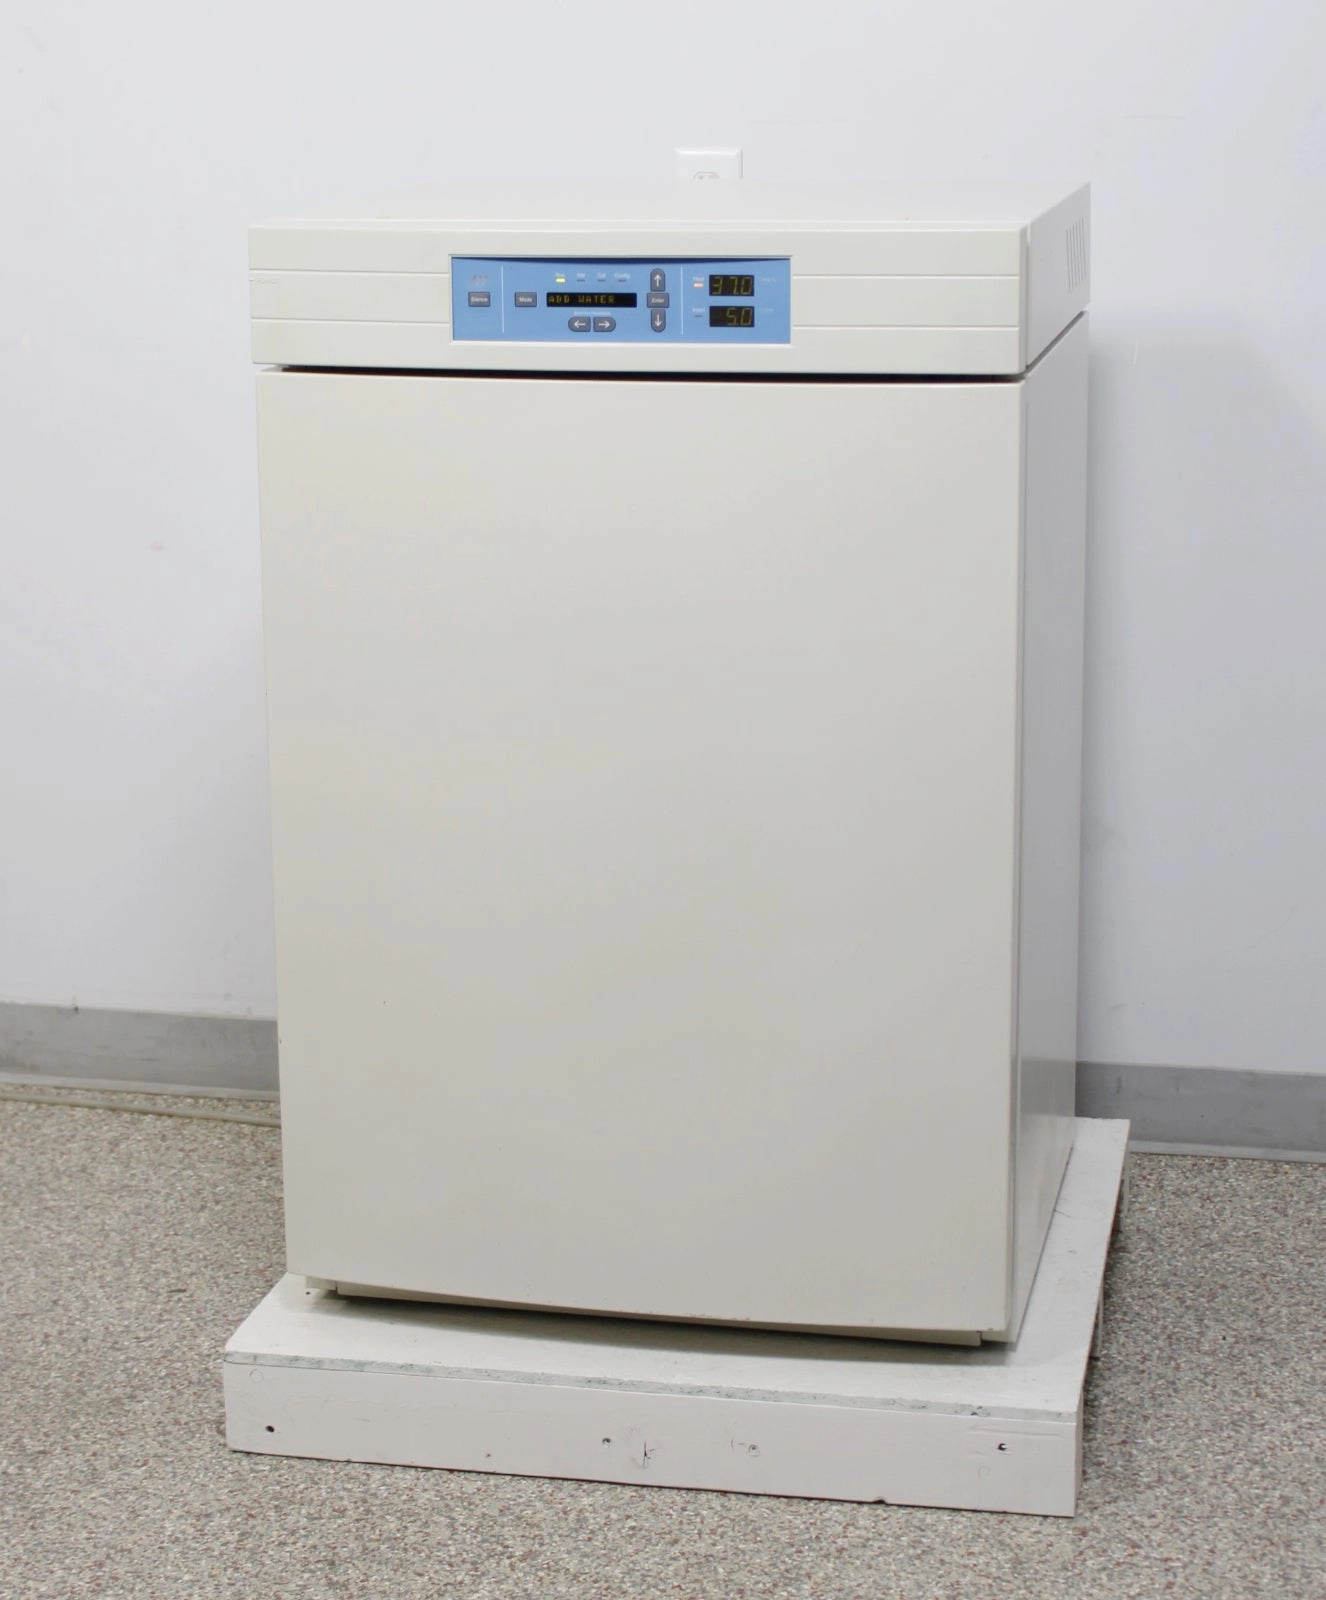 Thermo Forma 3110 Series II Water Jacket Stainless Steel CO2 Incubator &amp; Shelves